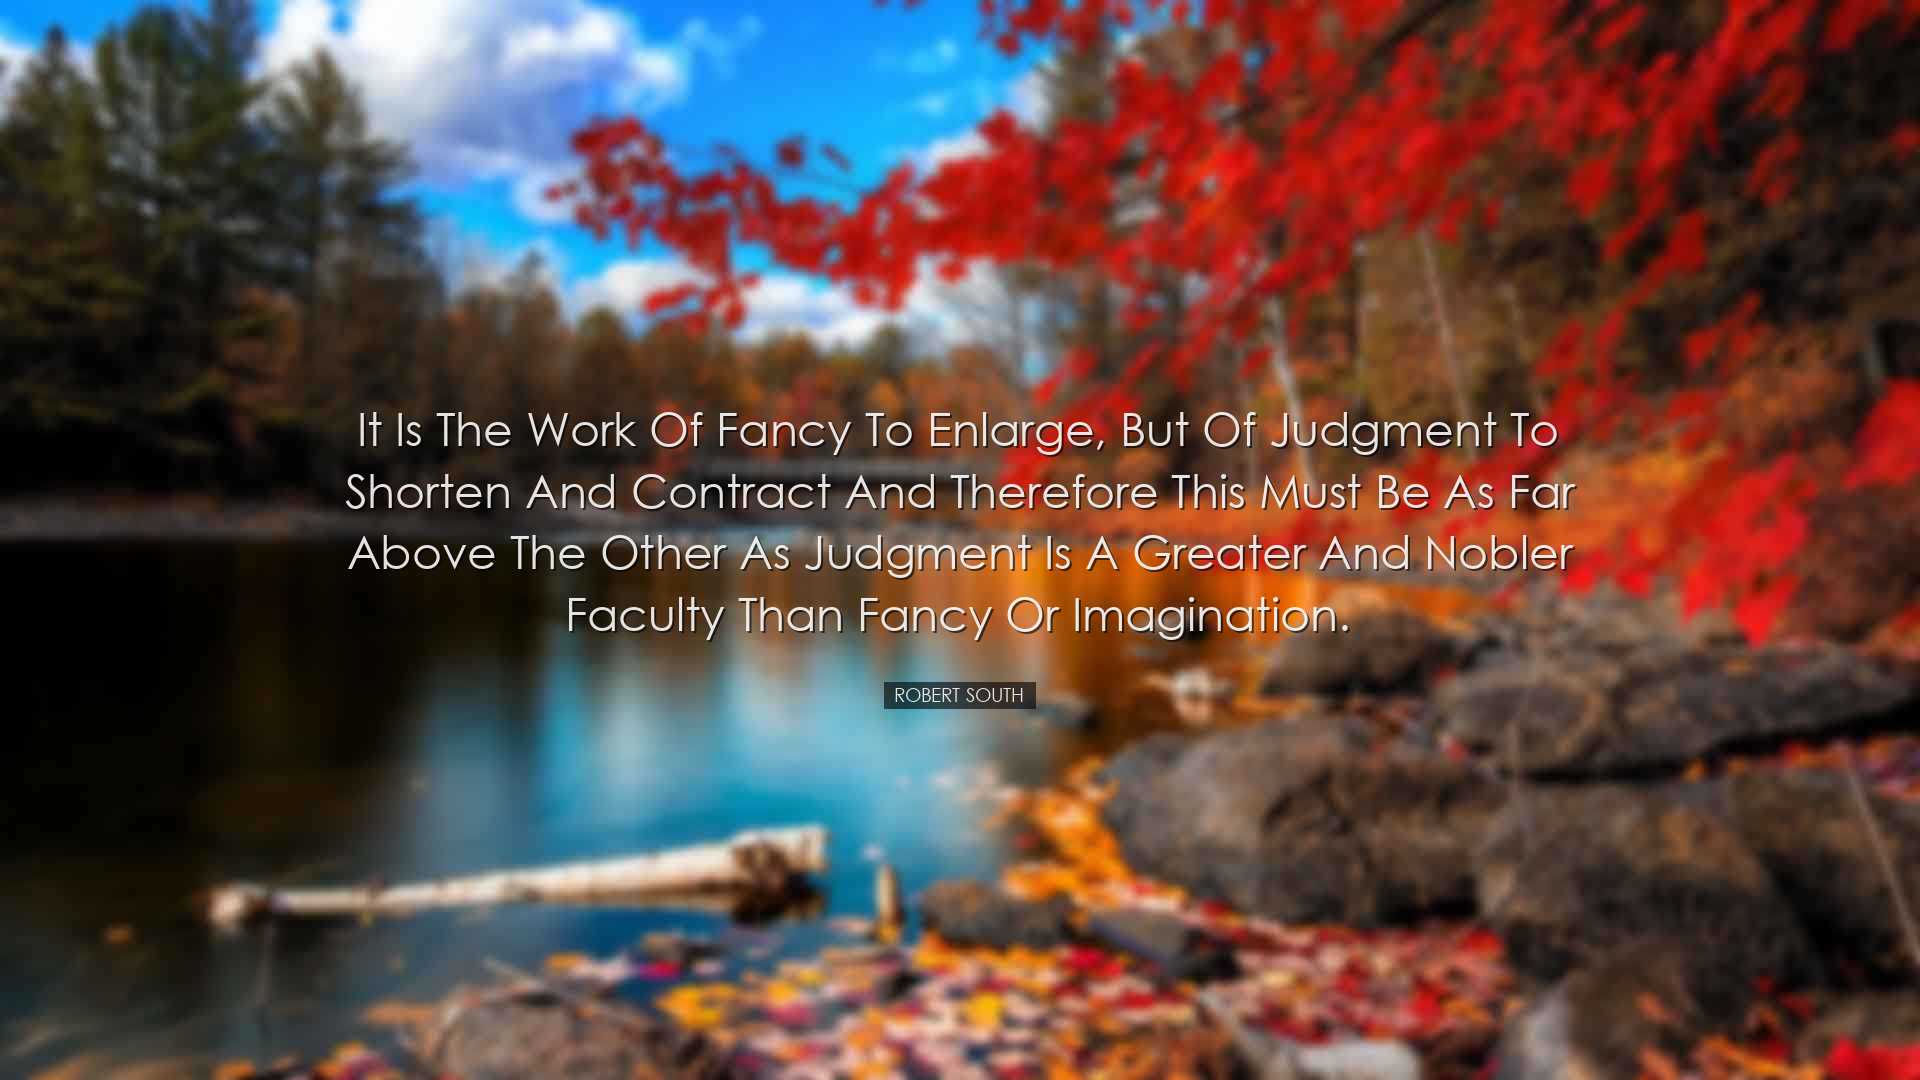 It is the work of fancy to enlarge, but of judgment to shorten and